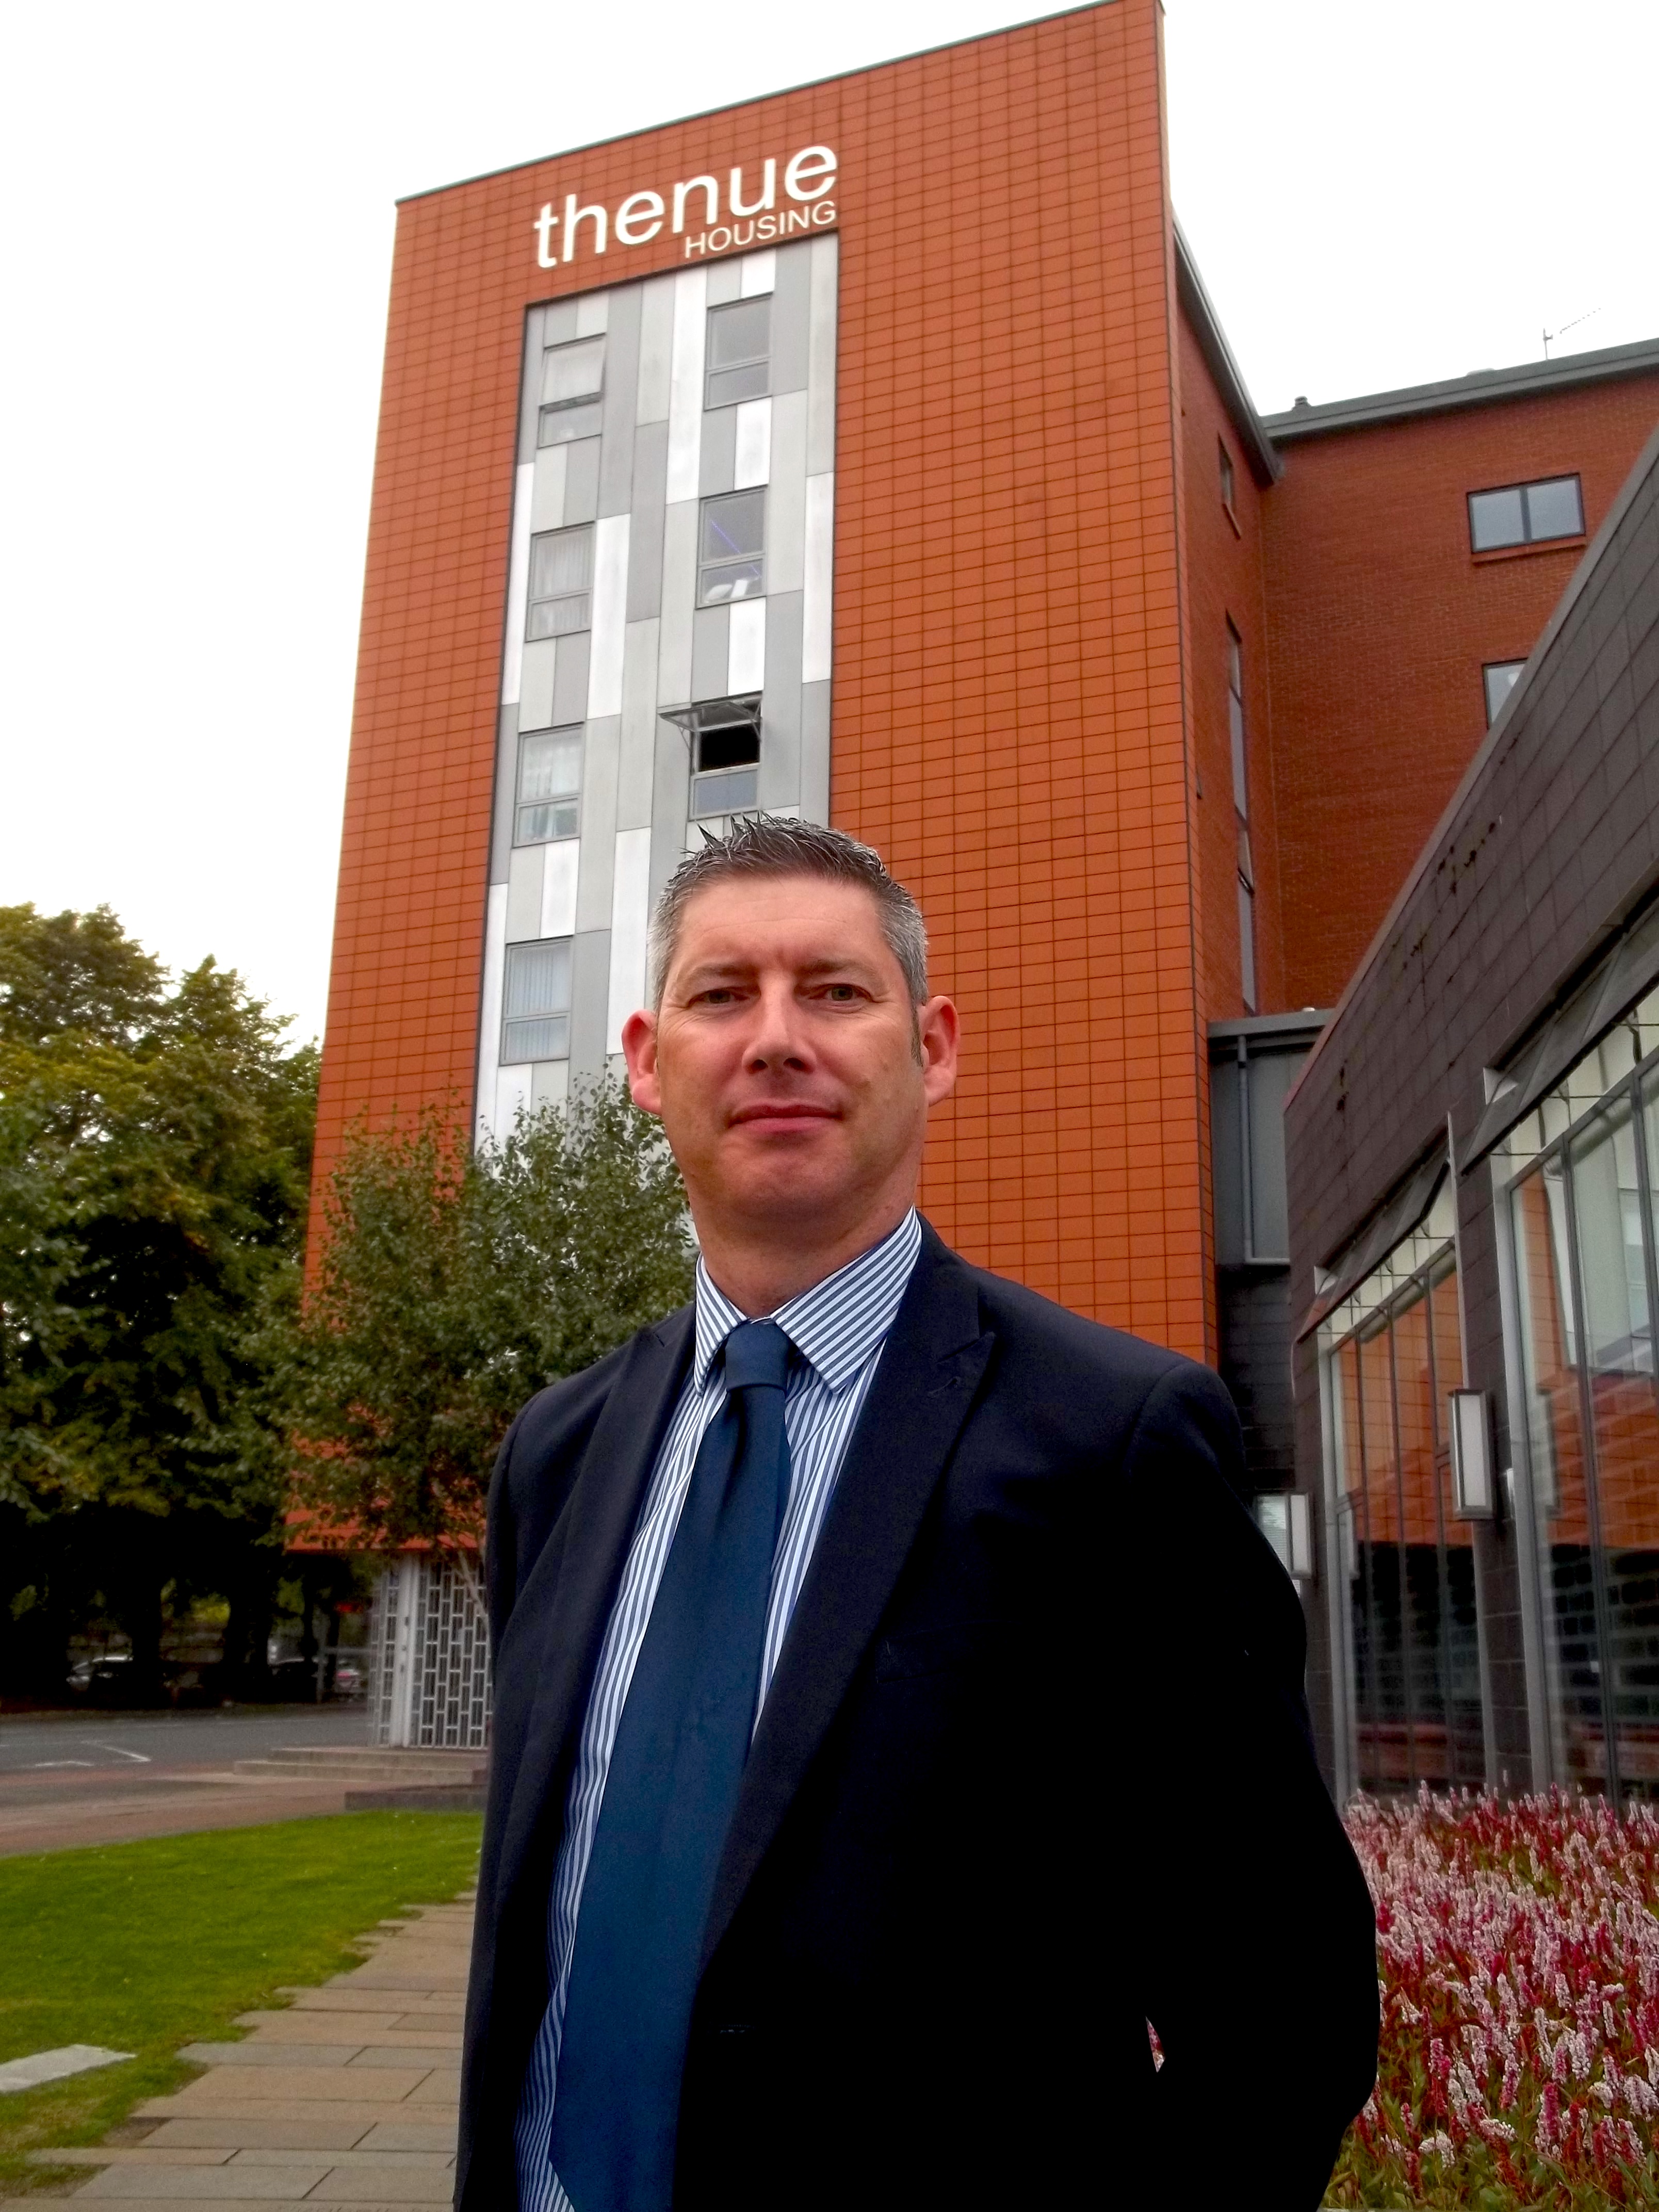 Barry Allan appointed director of finance at Thenue Housing